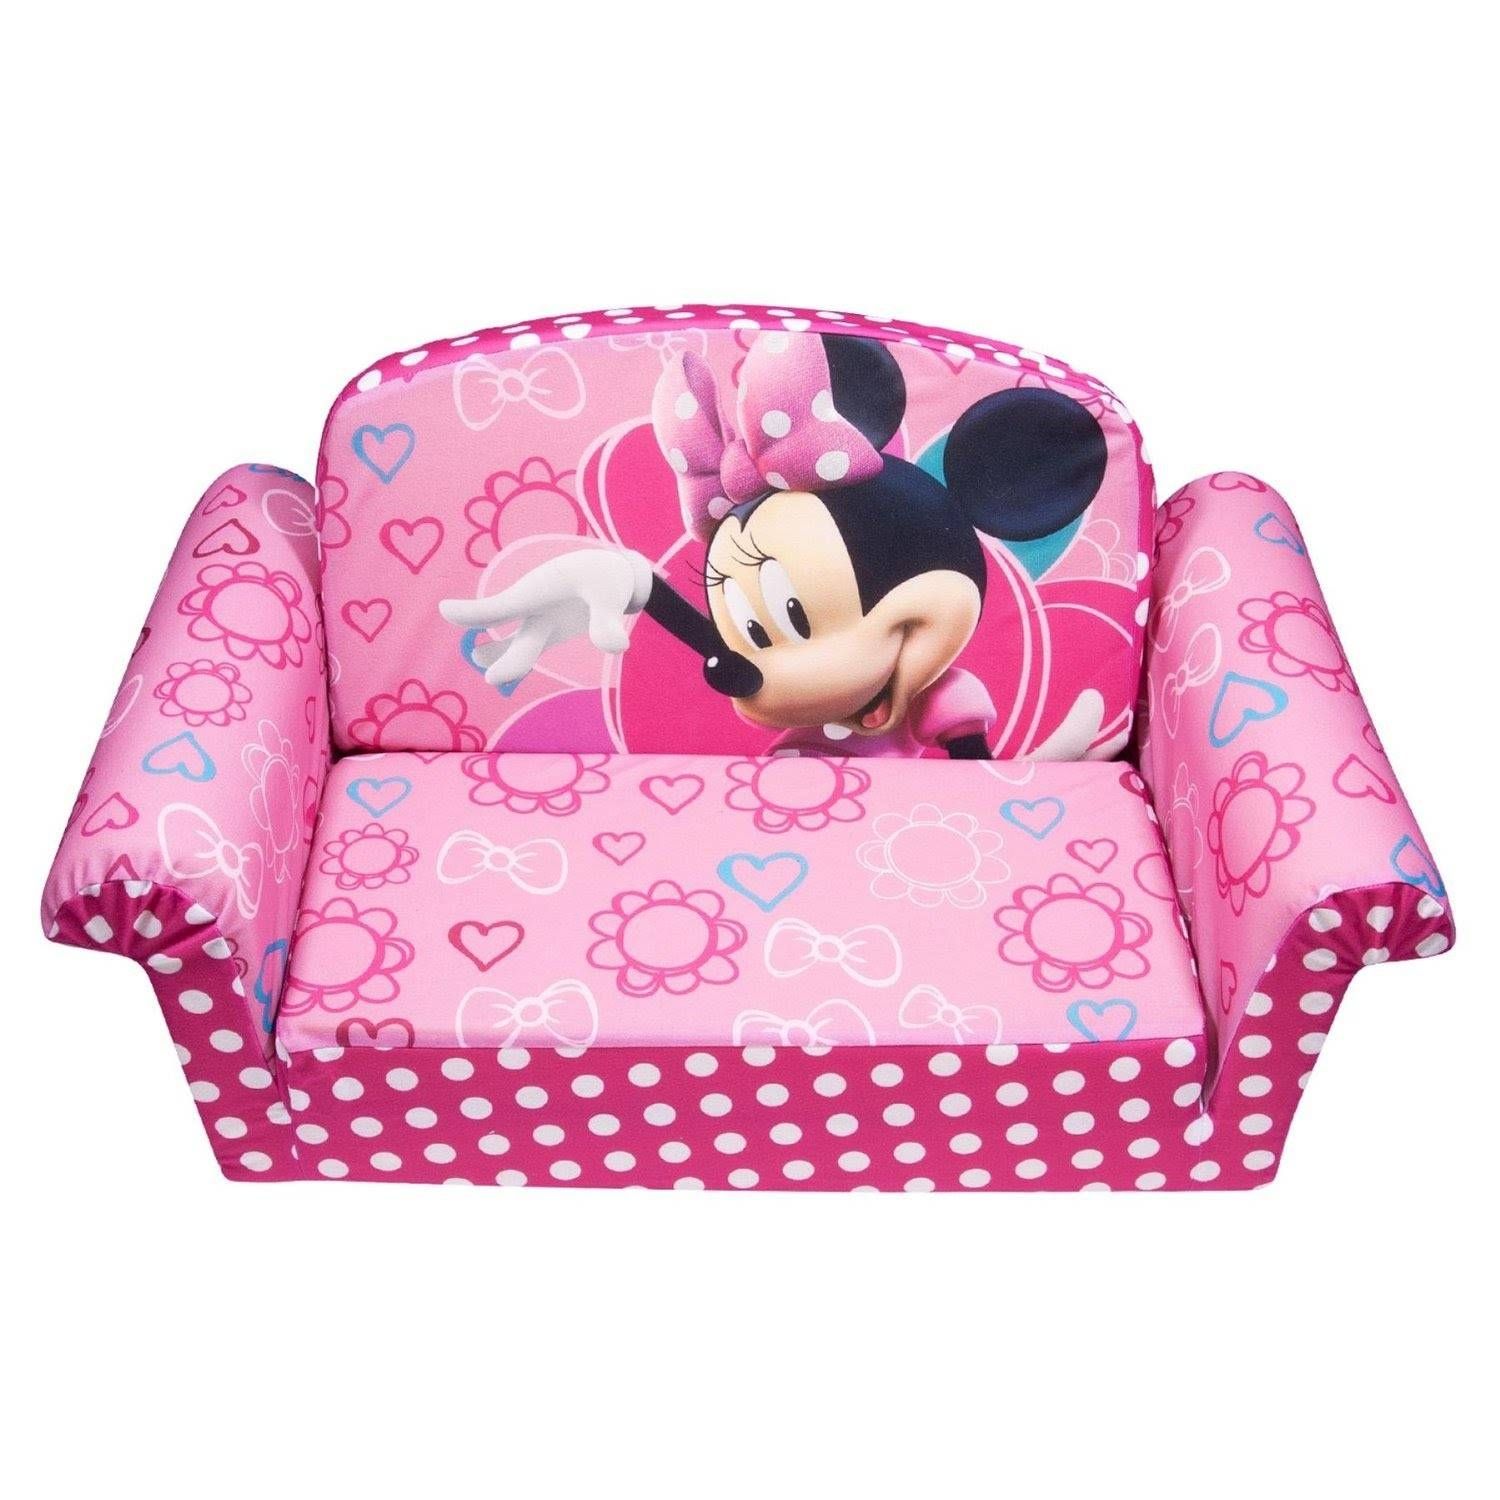 Review Marshmallow Childrens Furniture 2 In 1 Flip Open Sofa Within Flip Out Sofa For Kids 